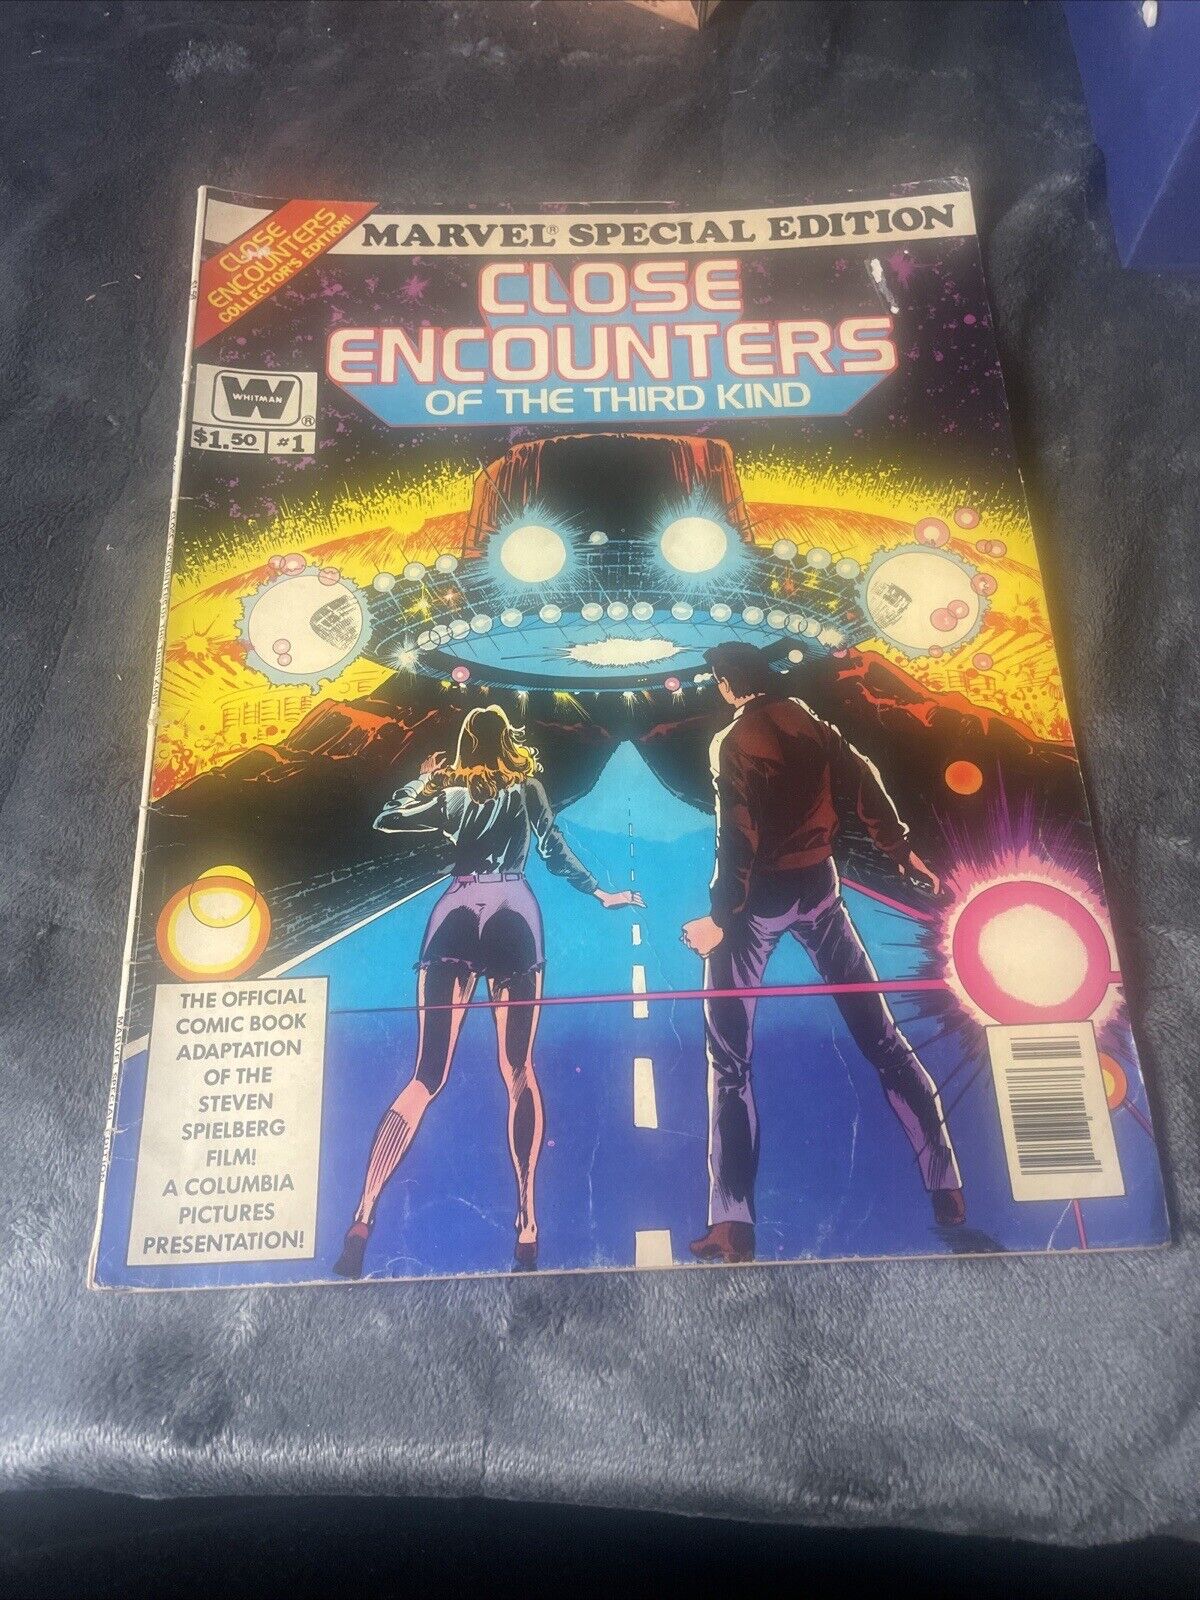 VTG 1978 Marvels Special Edition Close Encounters Of The Third Kind #1 Big Comic